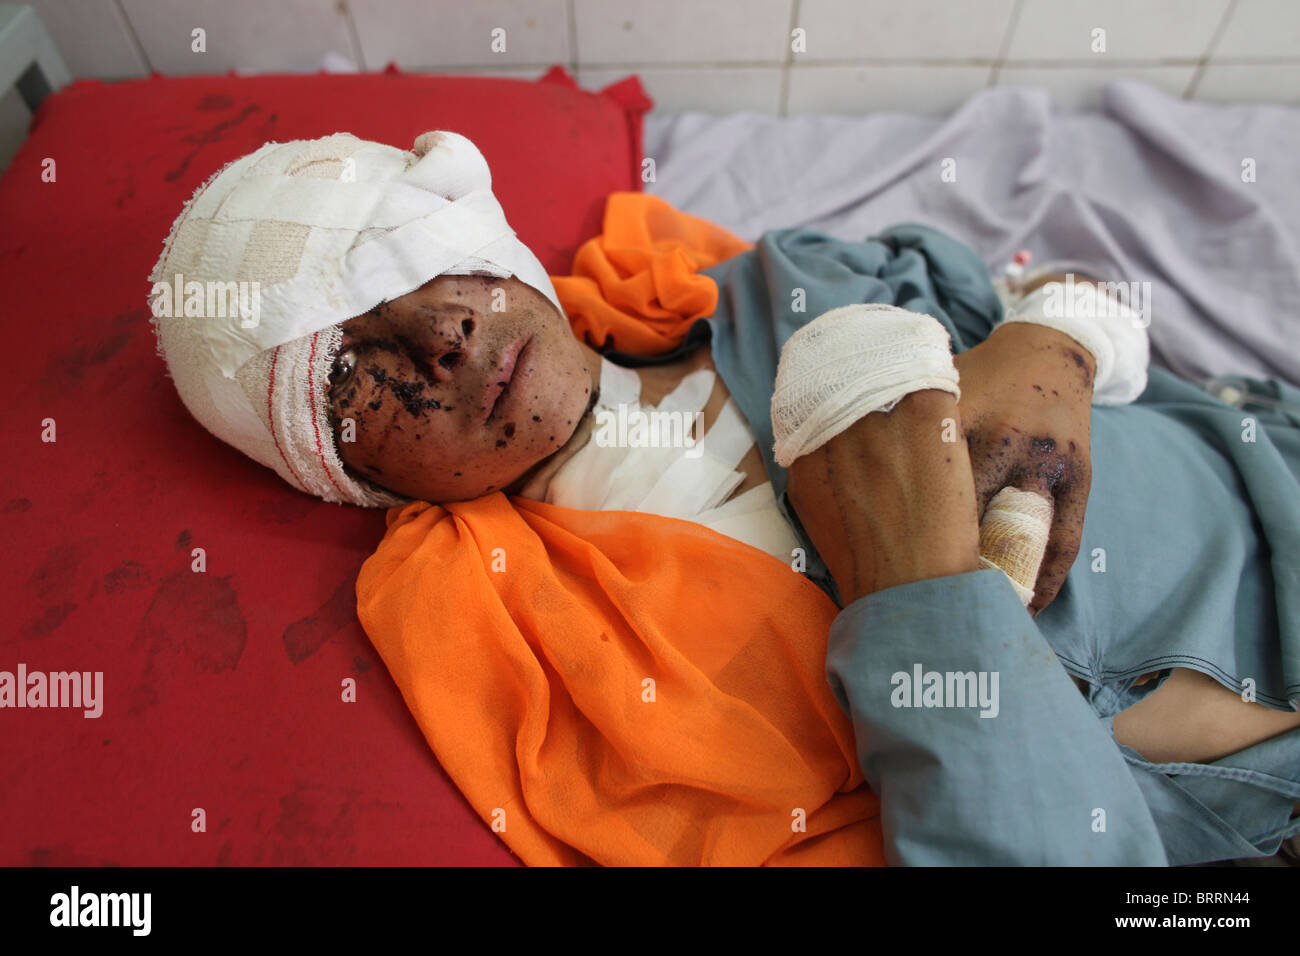 victims of a IED attack in Afghanistan Stock Photo